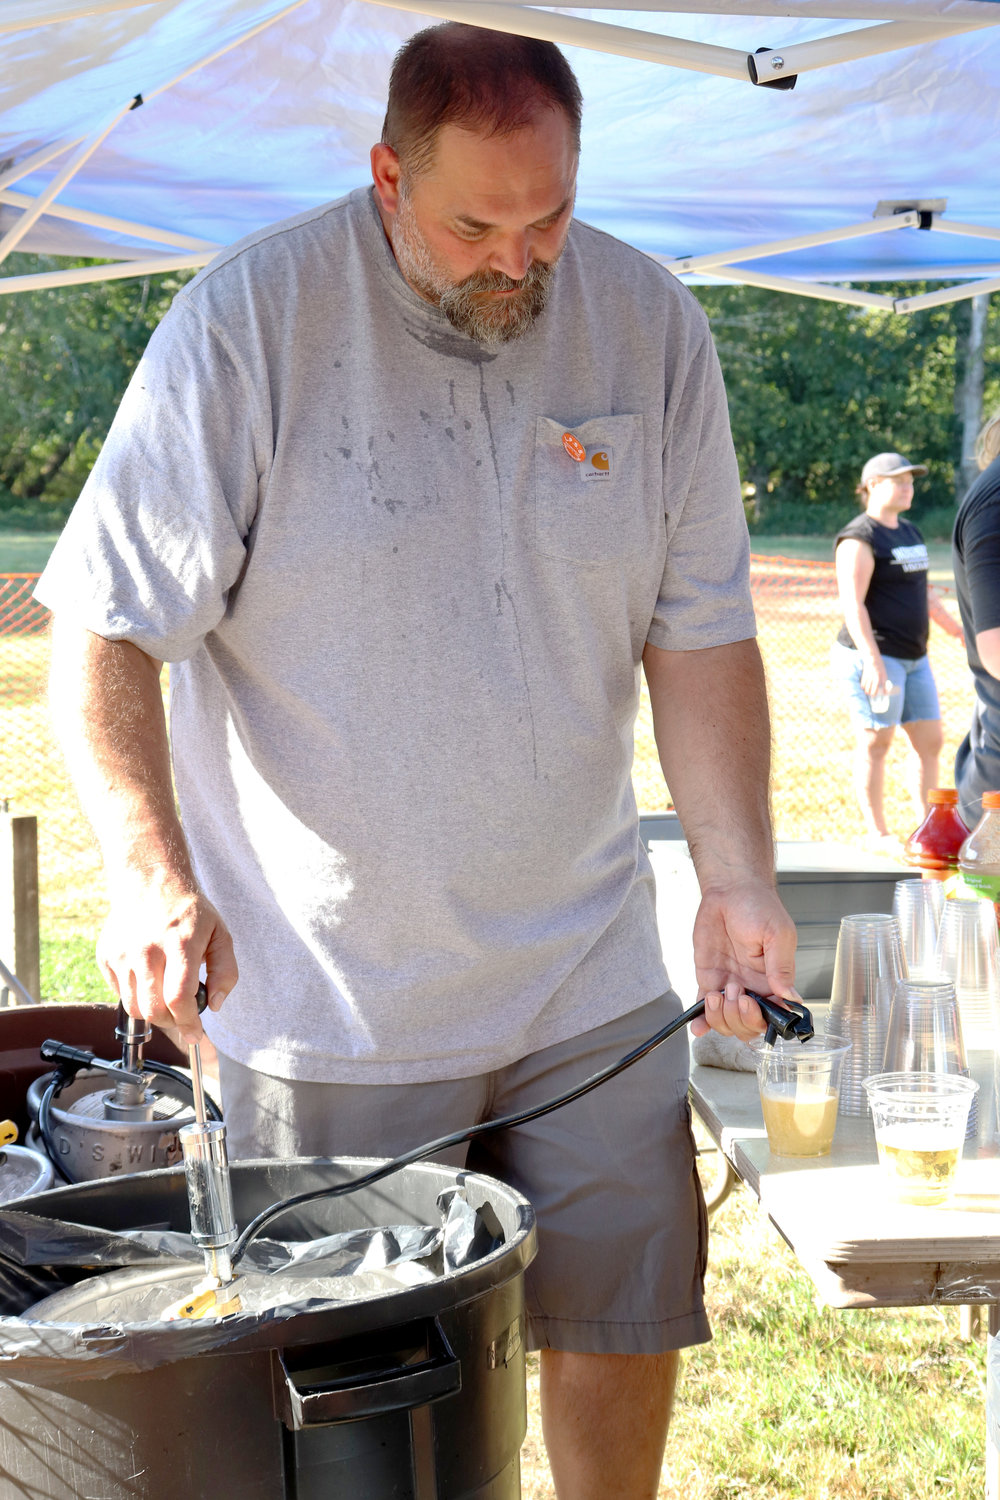 Paul Wilkenson serves beer from a keg at the Lewis-Pacific Swiss Society Oktoberfest in Frances on Saturday.